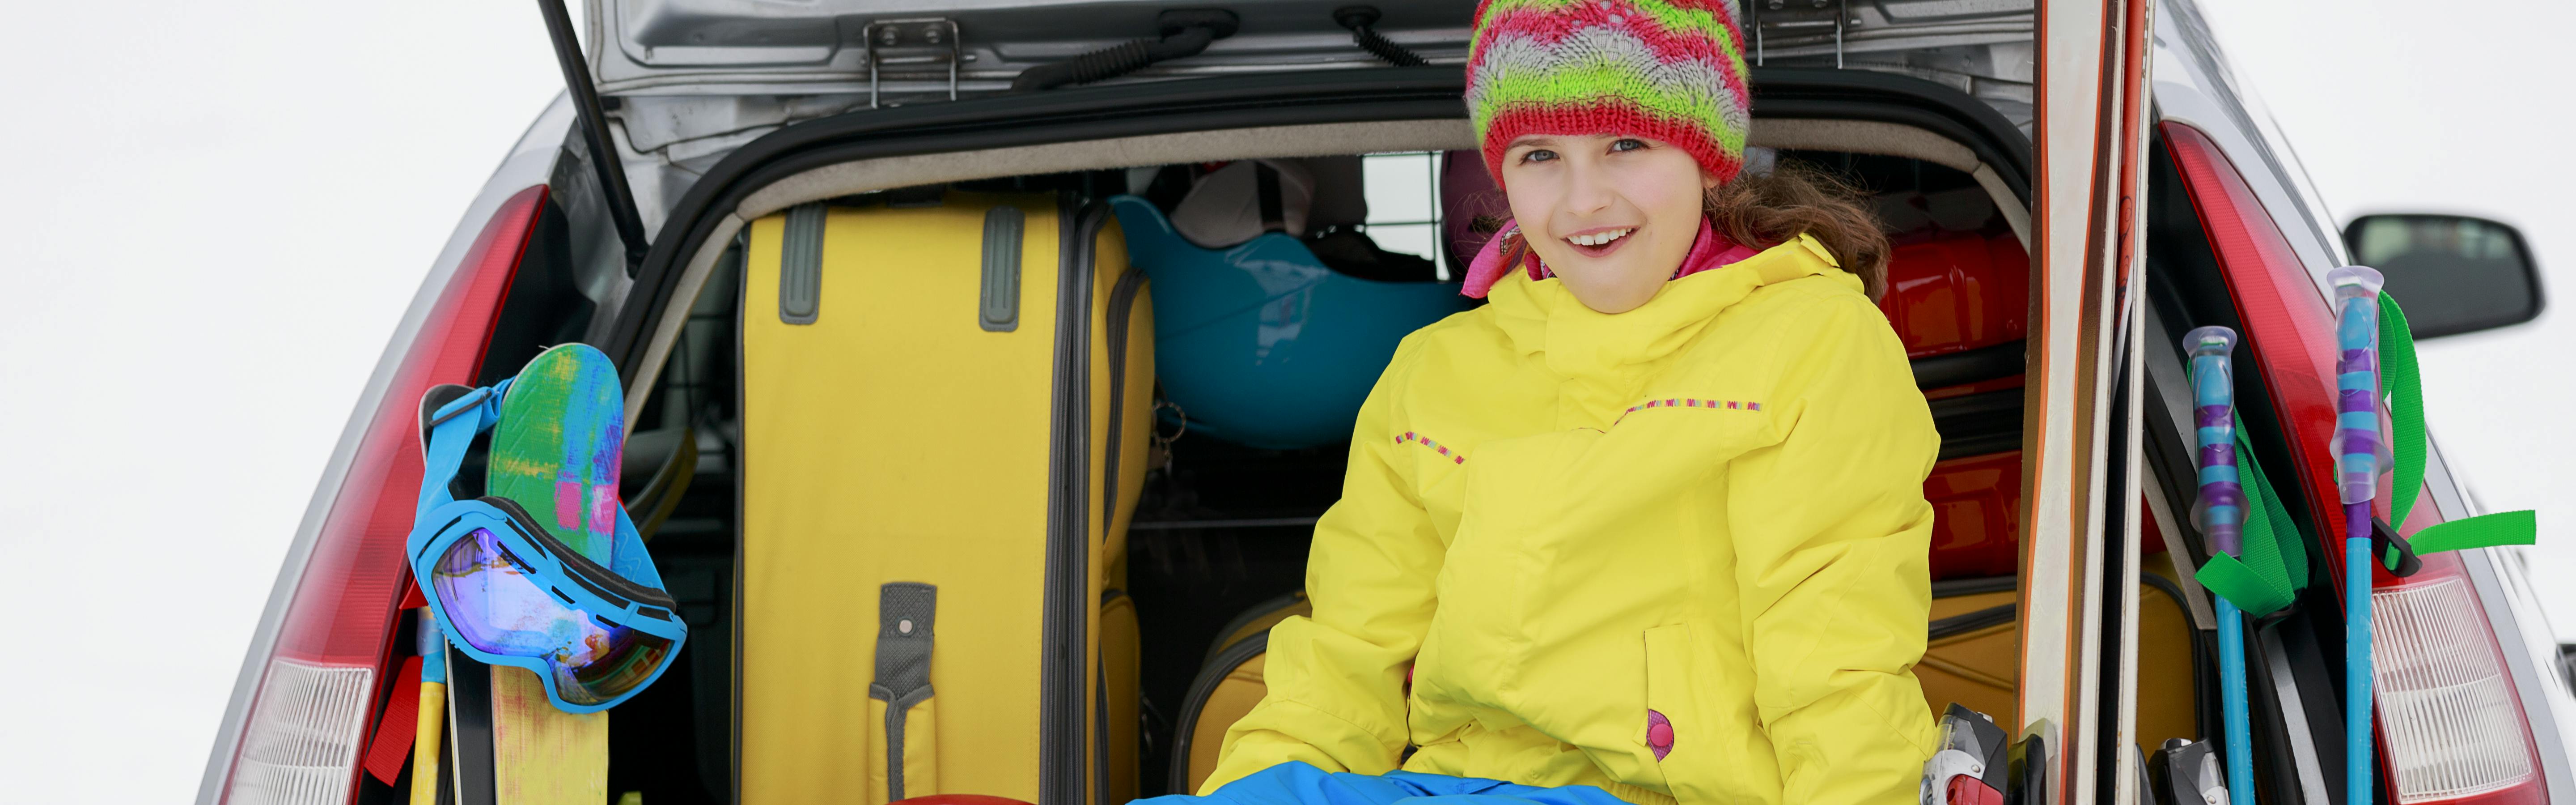 A young girl sitting in the trunk of a car smiling. There is a suitcase in the car, and ski gear surrounding the car. 